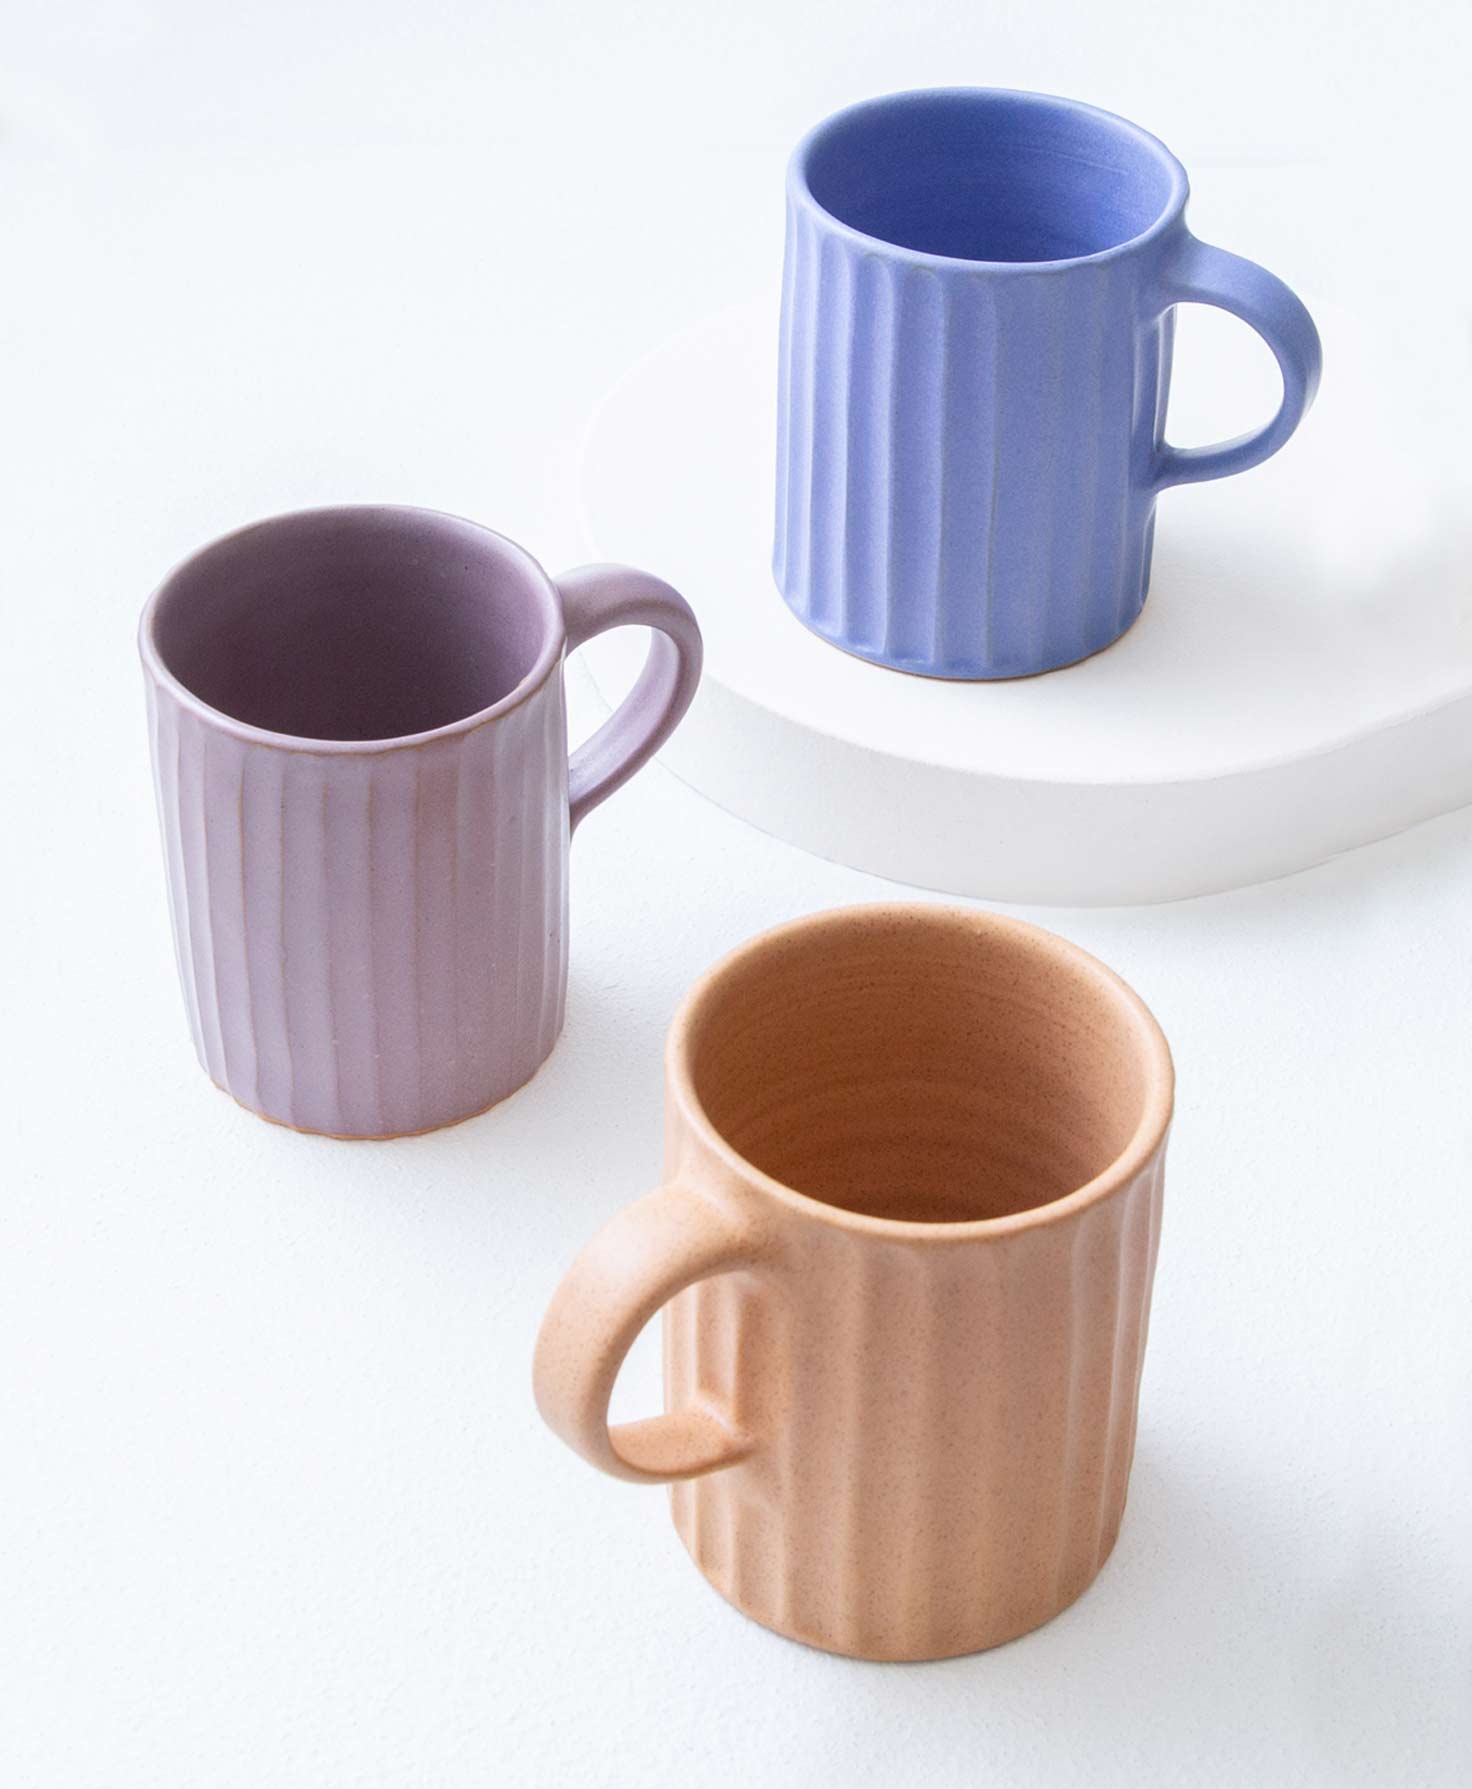 https://www.noondaycollection.info/img/product/textured-ceramic-mug,-set-of-3/textured-ceramic-mug,-set-of-3-large.jpg